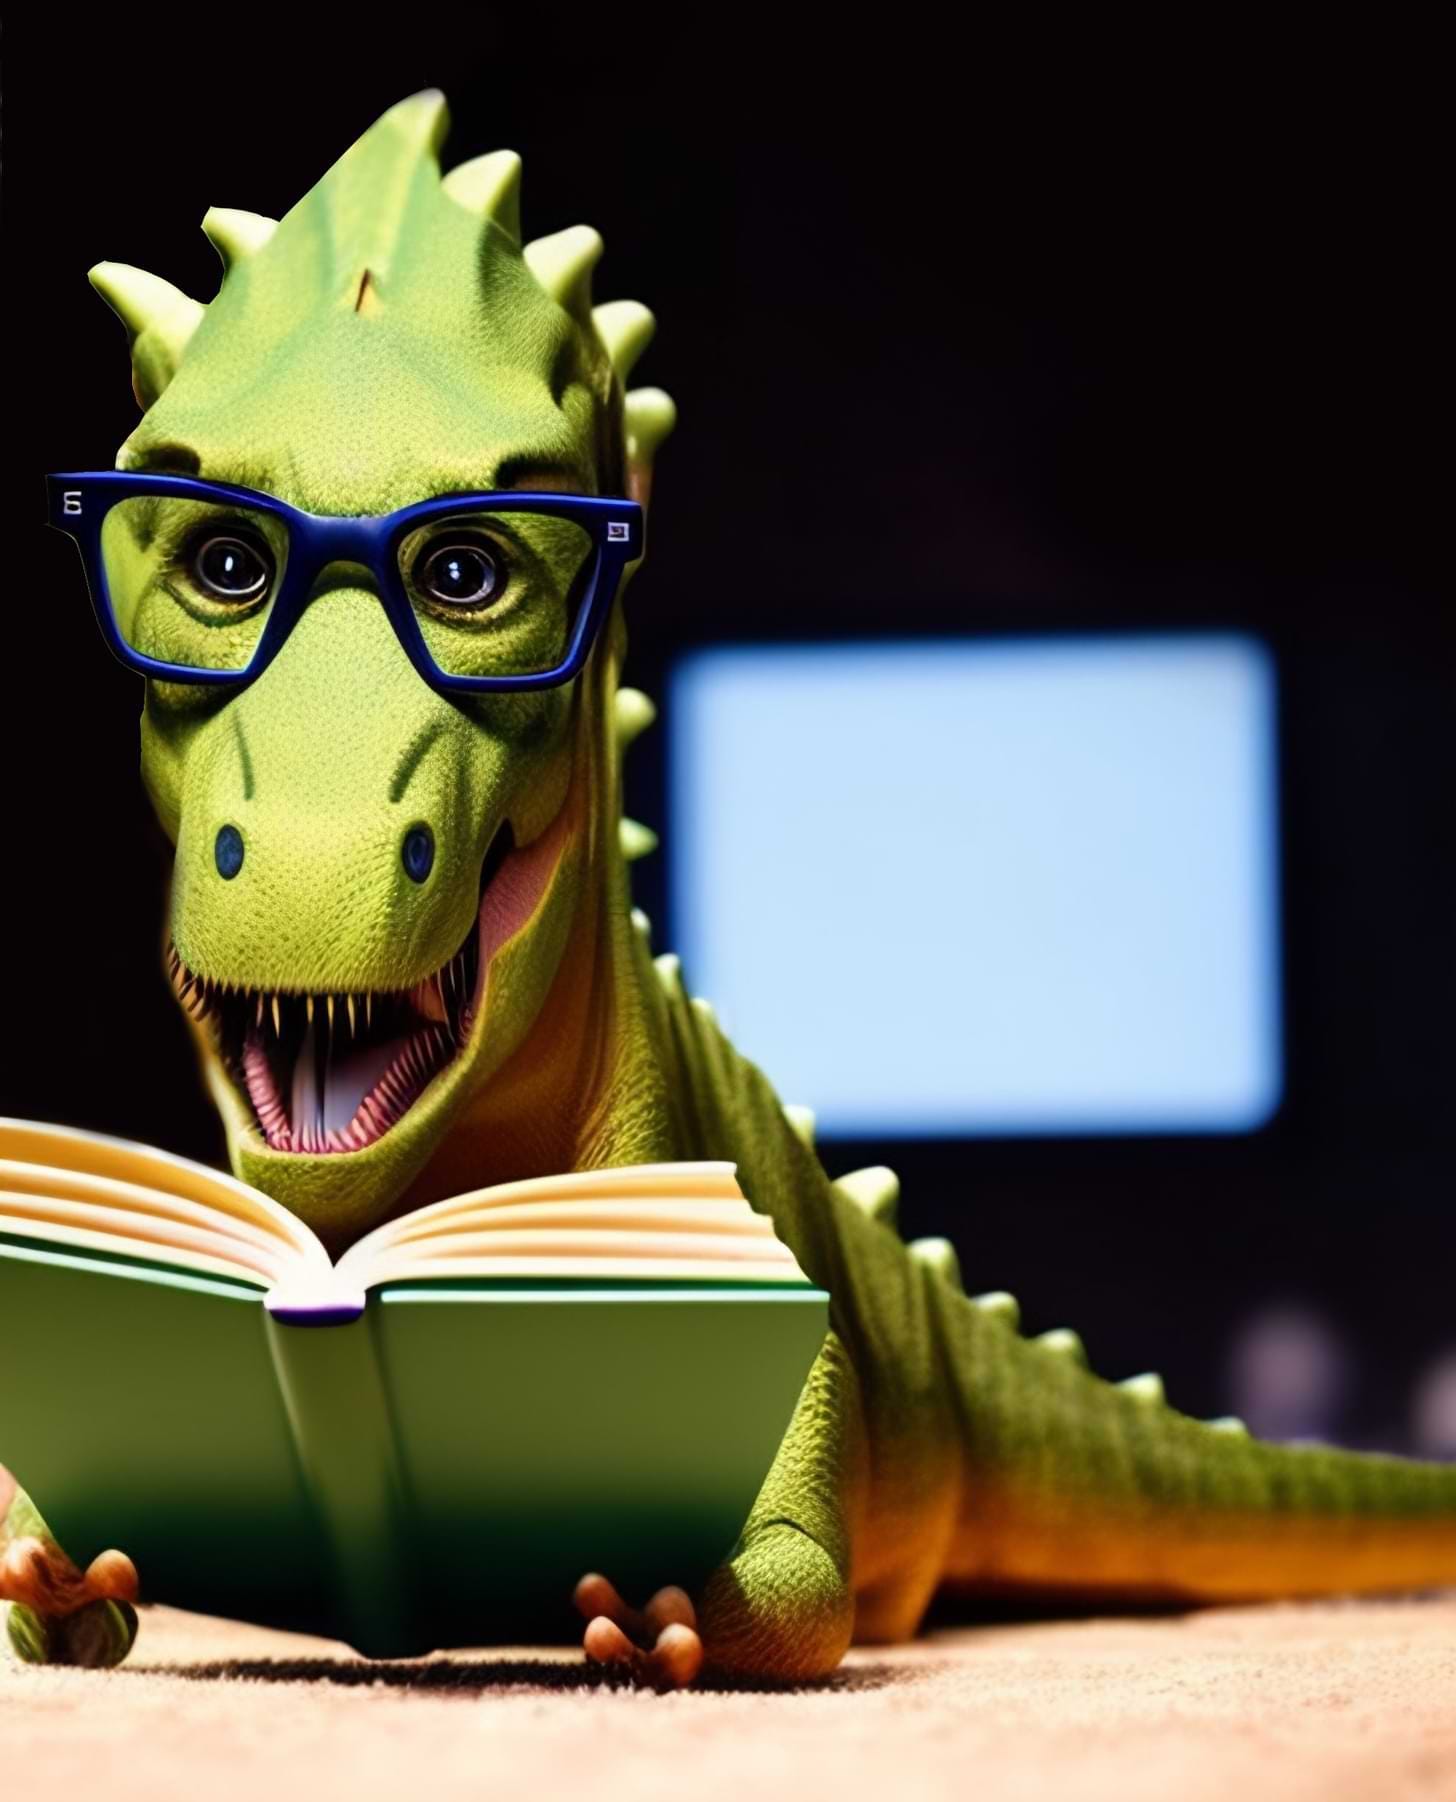 A green dinosaur wearing glasses reads a book while lying on the floor in front of a TV.